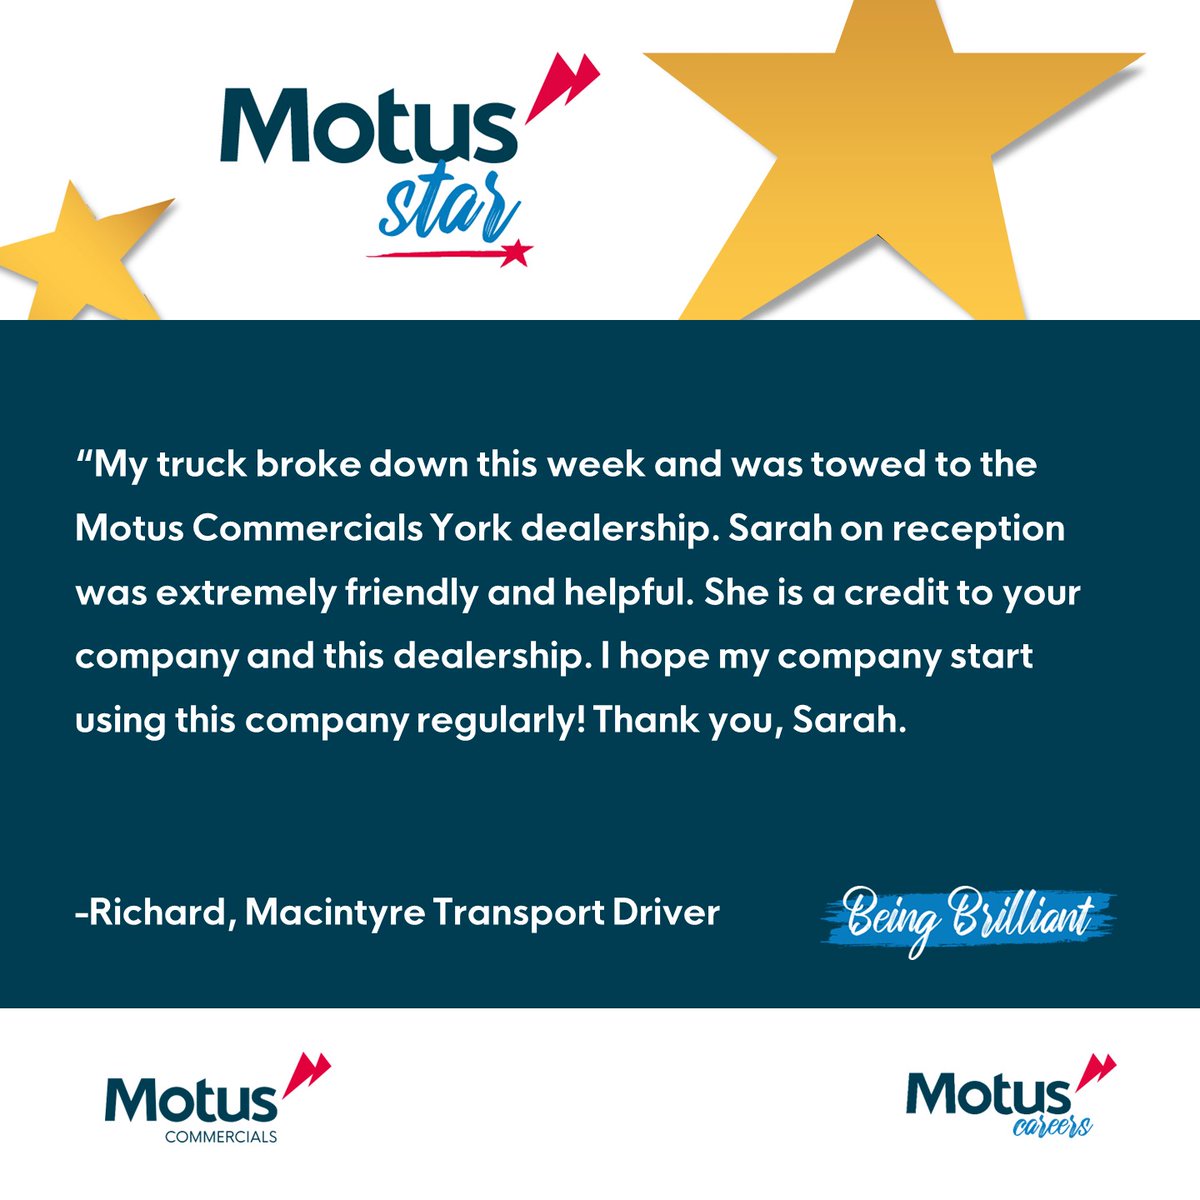 Let's start the week with an amazing Motus achievement! ⭐

Sarah, from Motus Commercials York, has been nominated for a Motus Star award!

Read below to see why! ⬇️

Congratulations, Sarah, your hard work doesn't go unrecognised ⭐

#MondsyMotivation #MotusStar #MotusCommercials